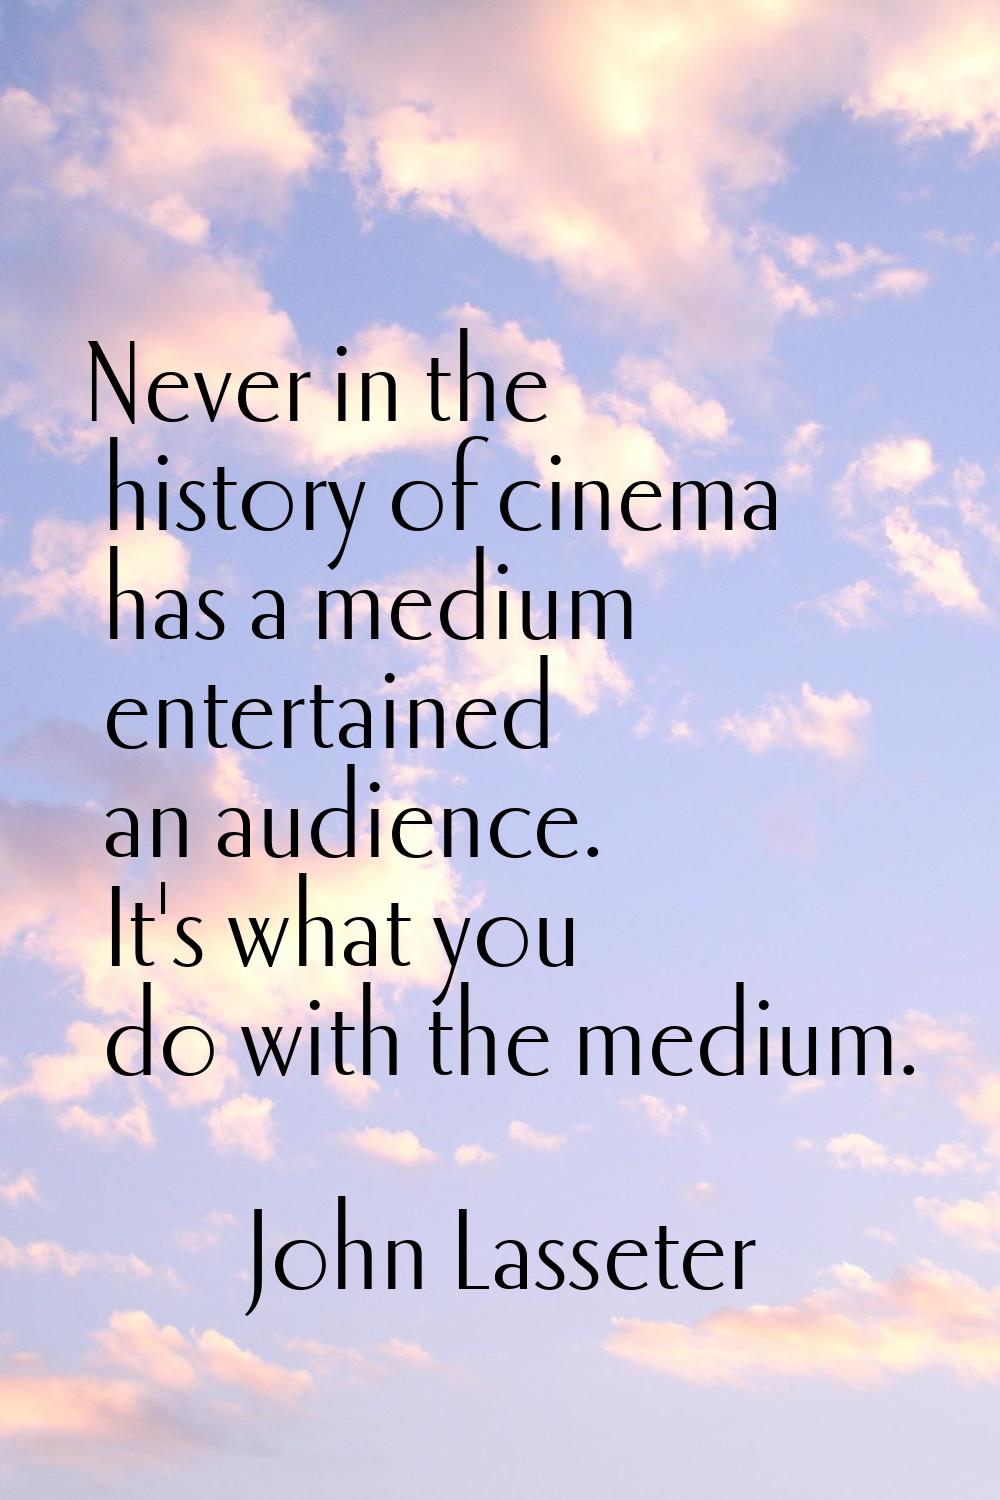 Never in the history of cinema has a medium entertained an audience. It's what you do with the medi